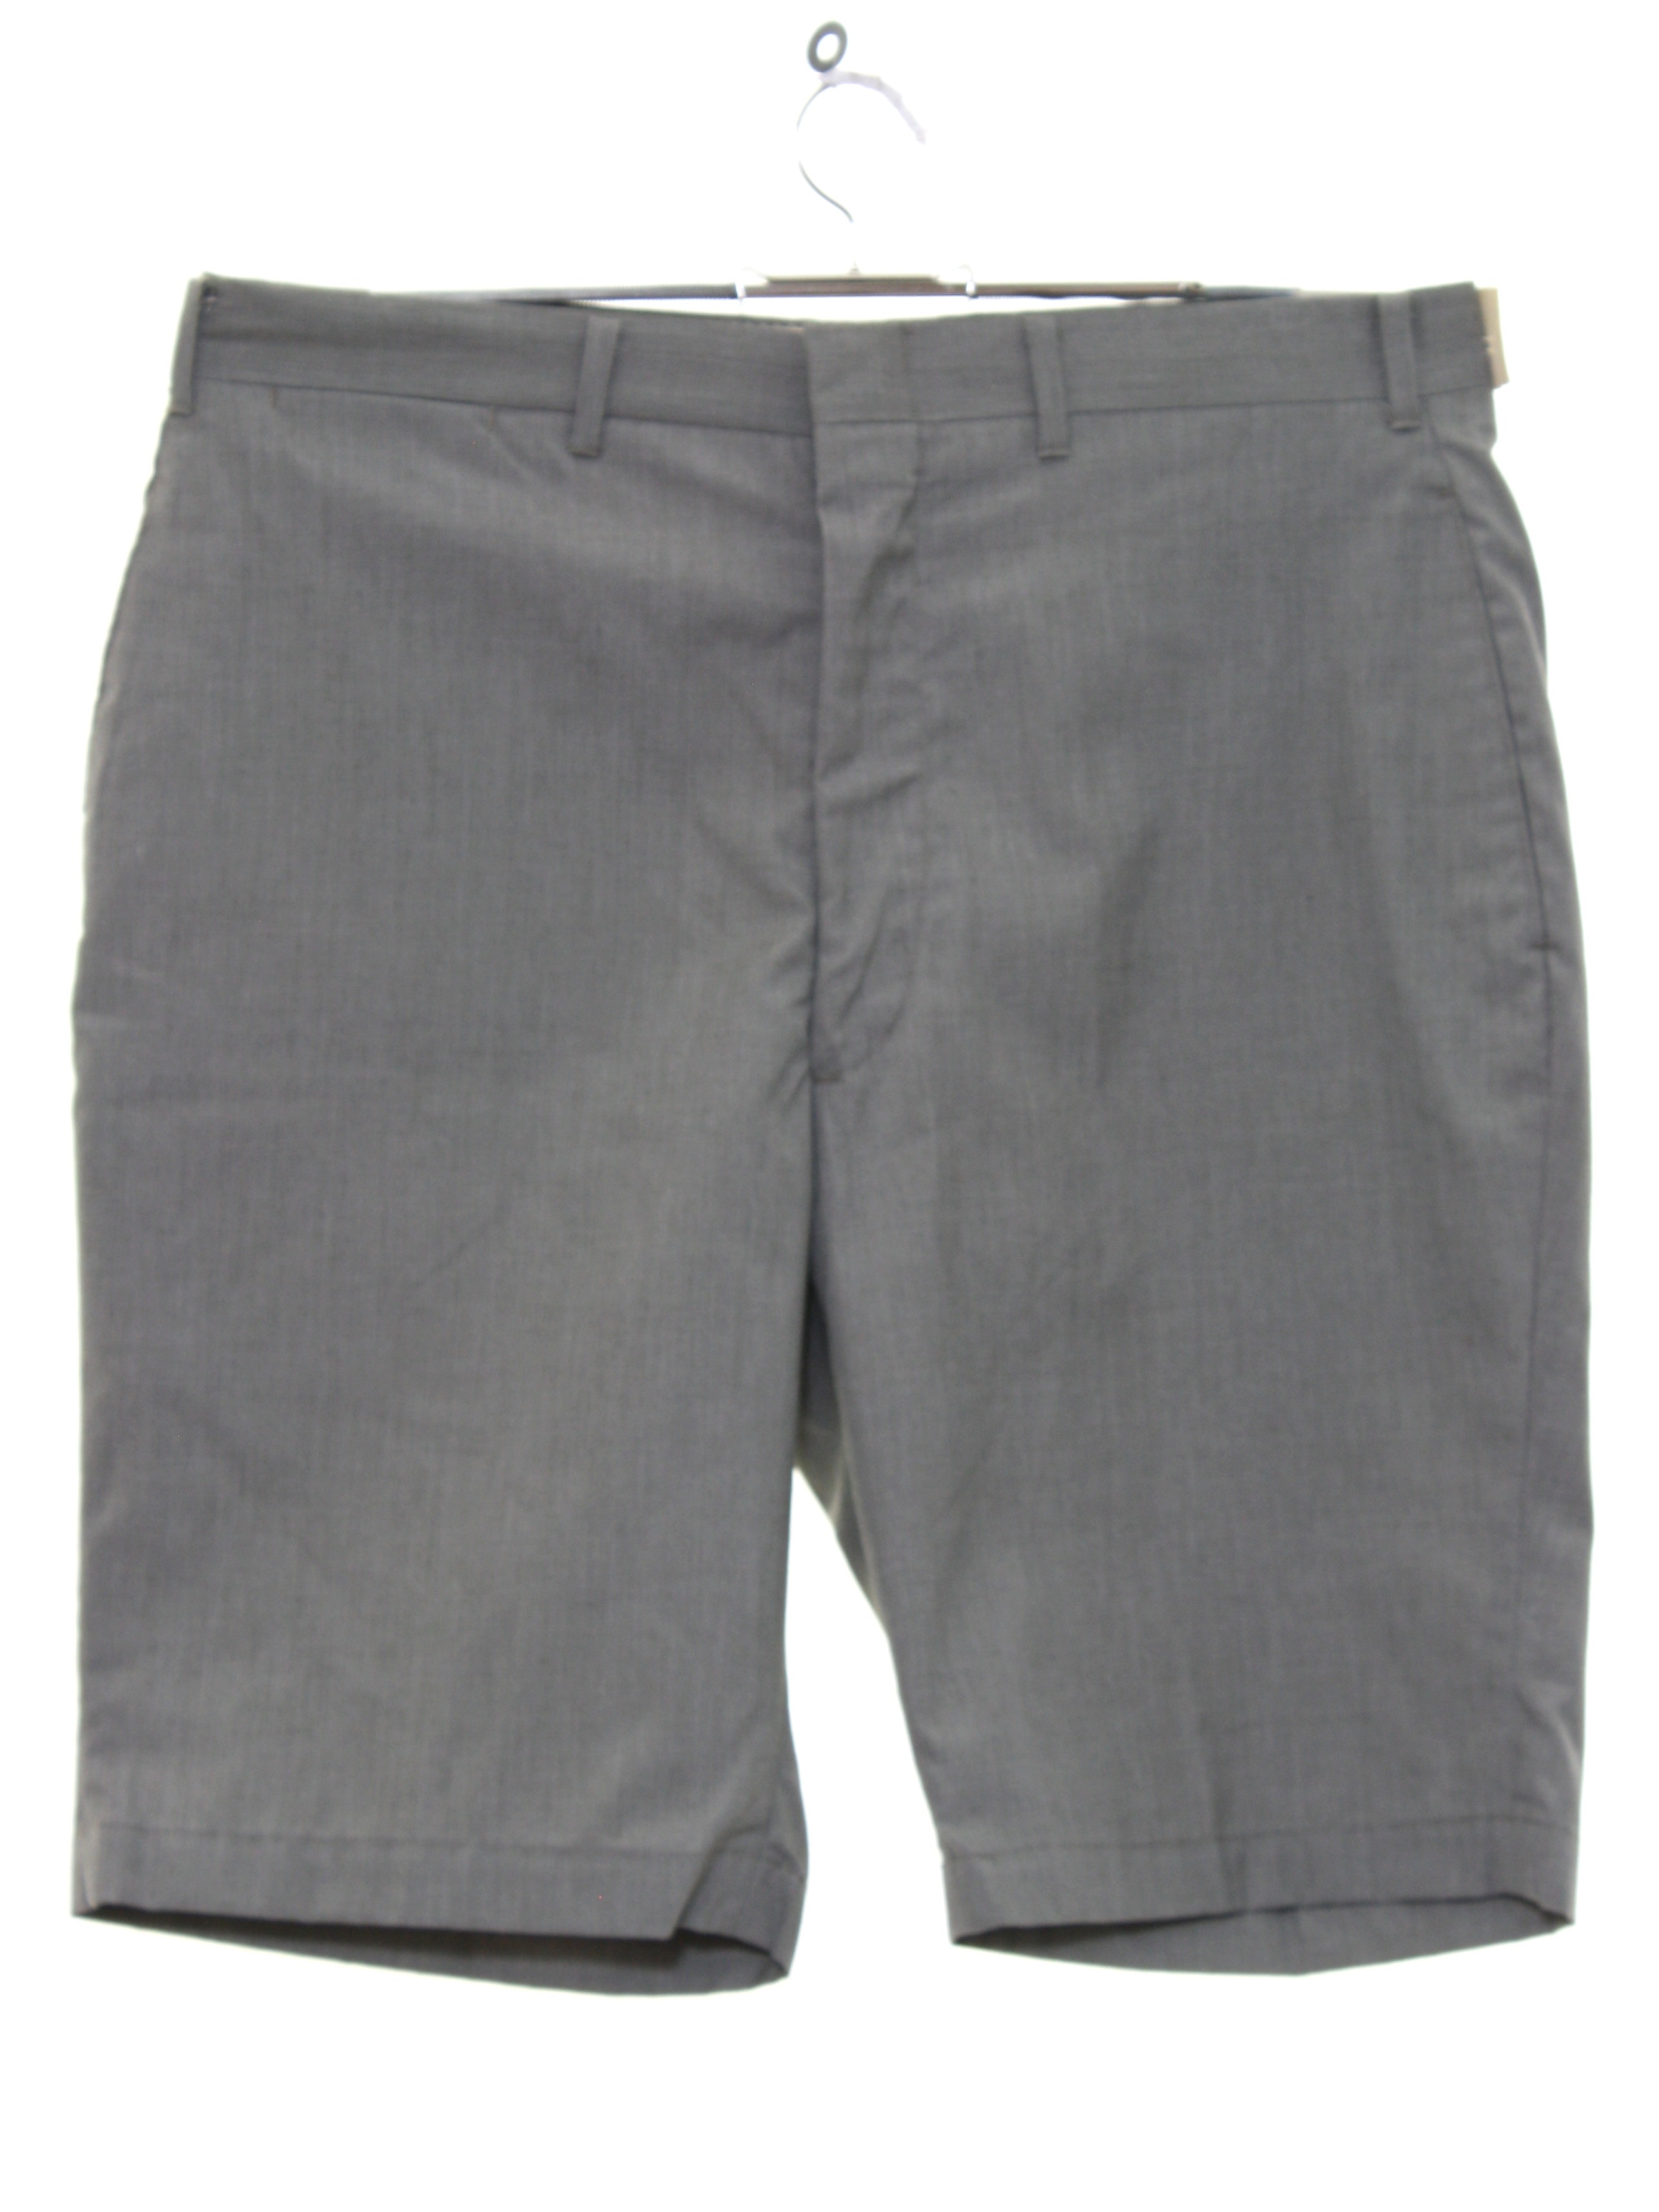 Retro 60's Shorts: Early 60s -Brent- Mens heather warm gray background ...